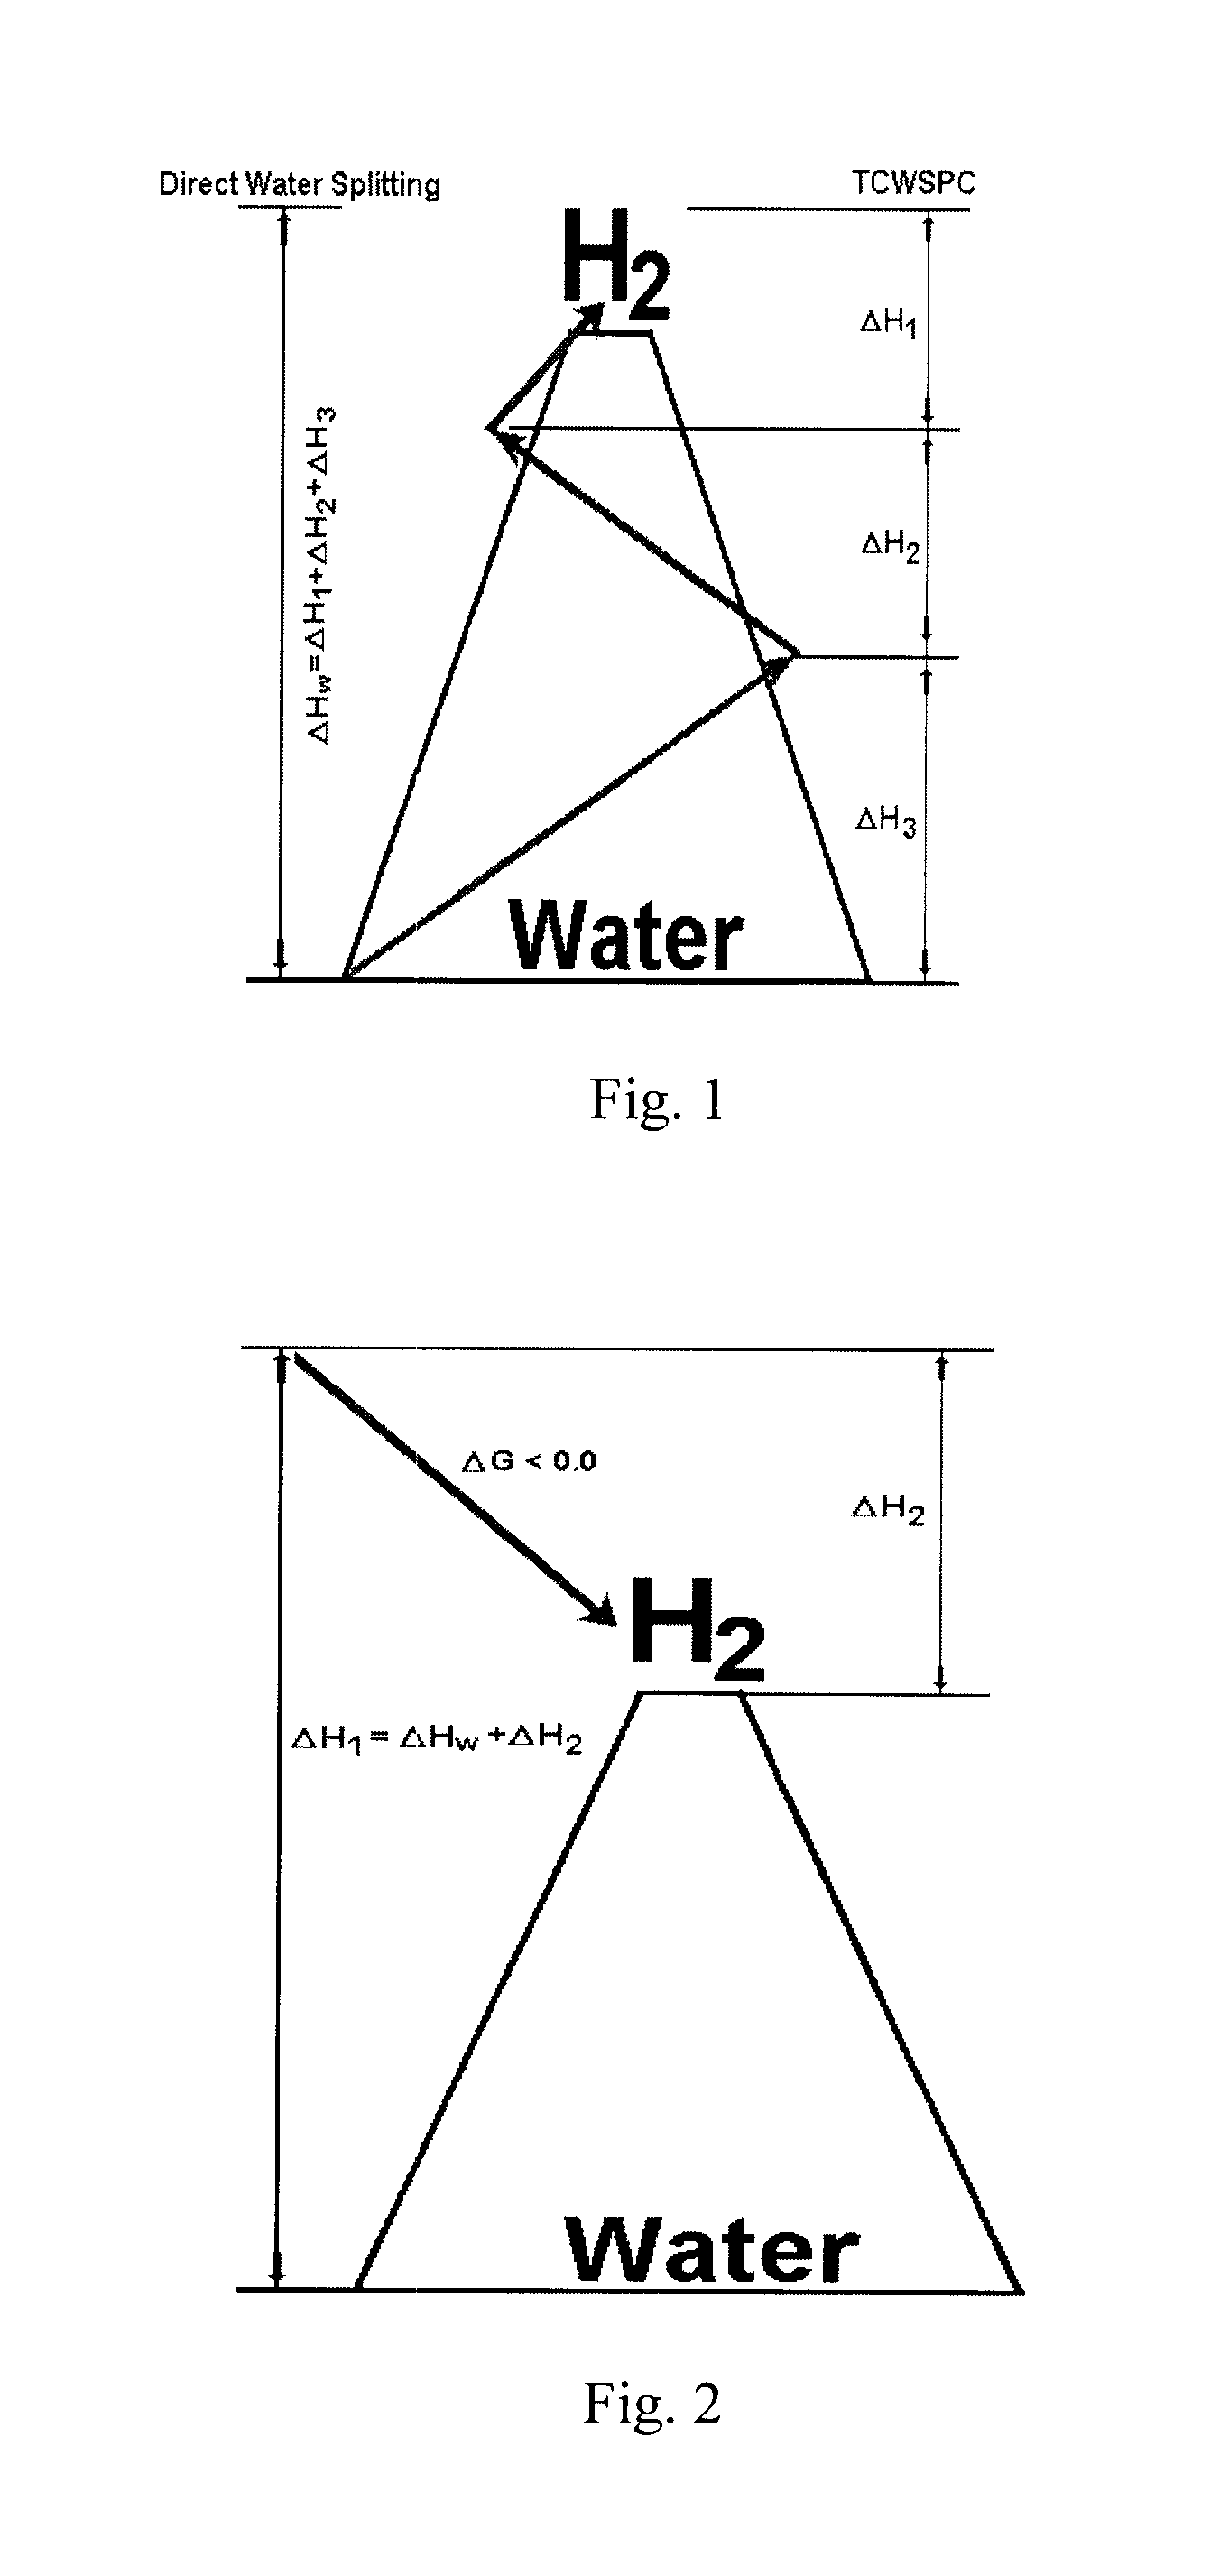 Solar metal sulfate-ammonia based thermochemical water splitting cycle for hydrogen production